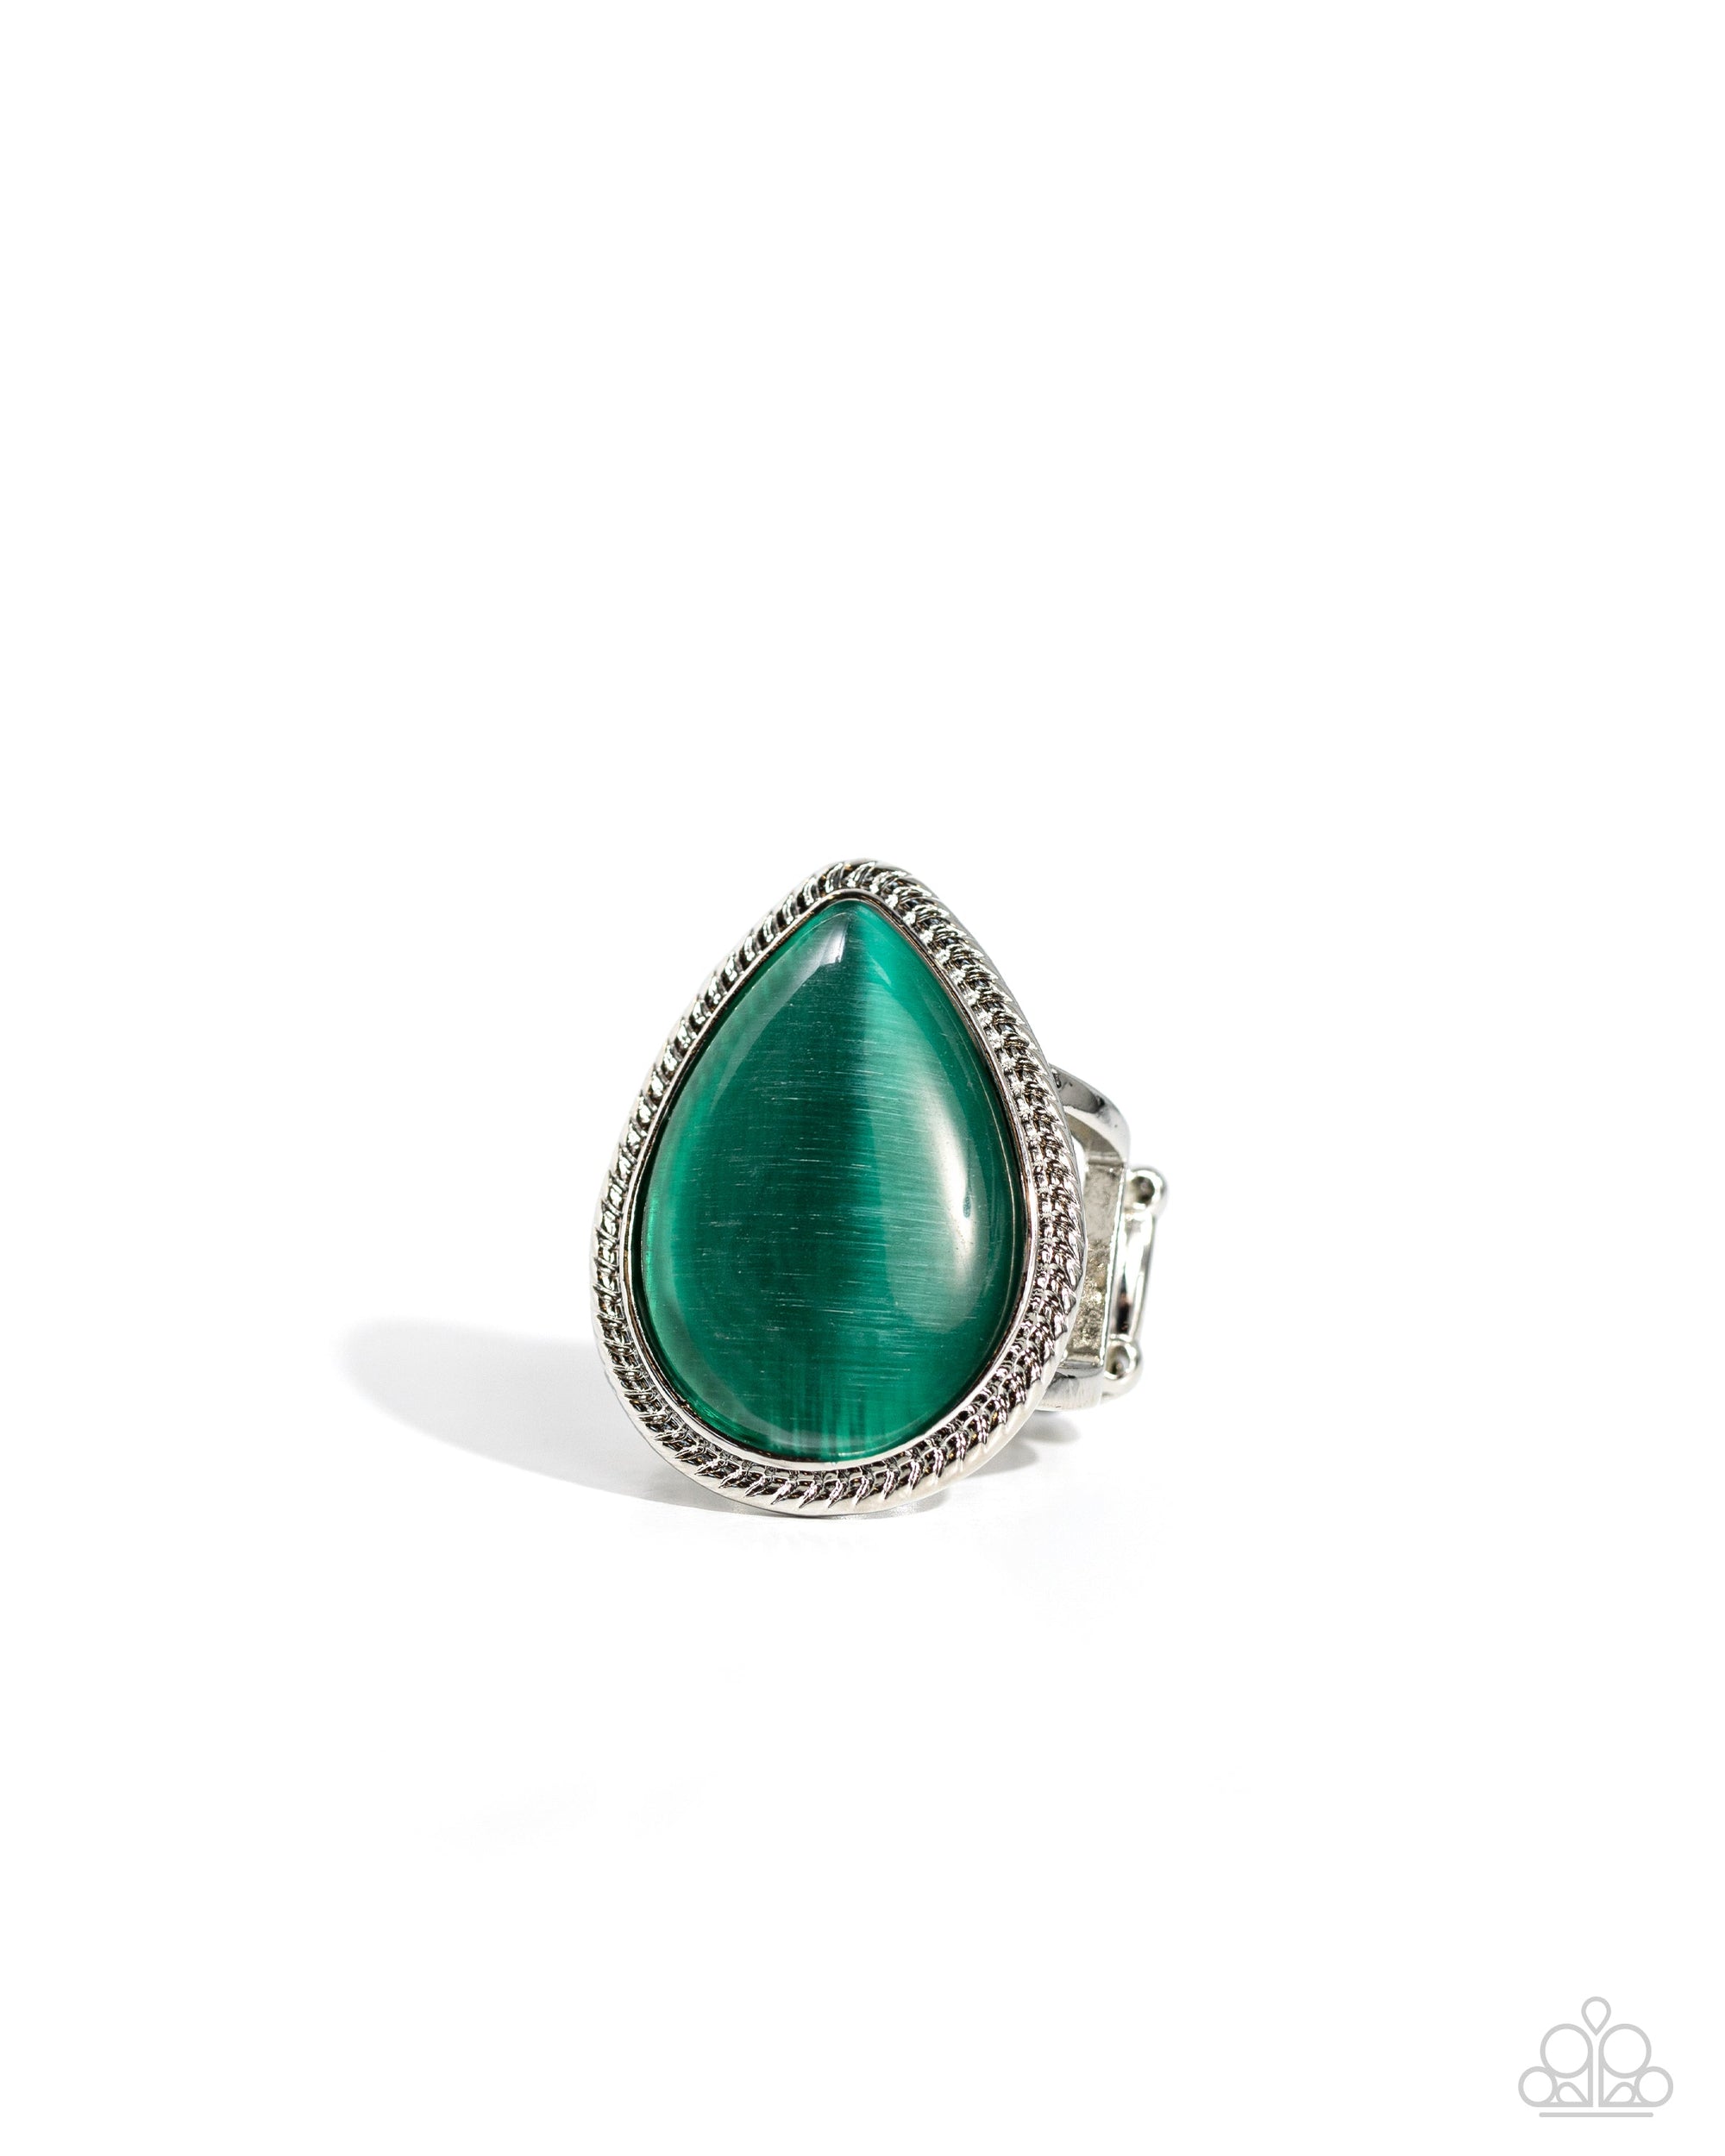 The Rain in MAINE Green Cat's Eye Stone Ring - Paparazzi Accessories- lightbox - CarasShop.com - $5 Jewelry by Cara Jewels